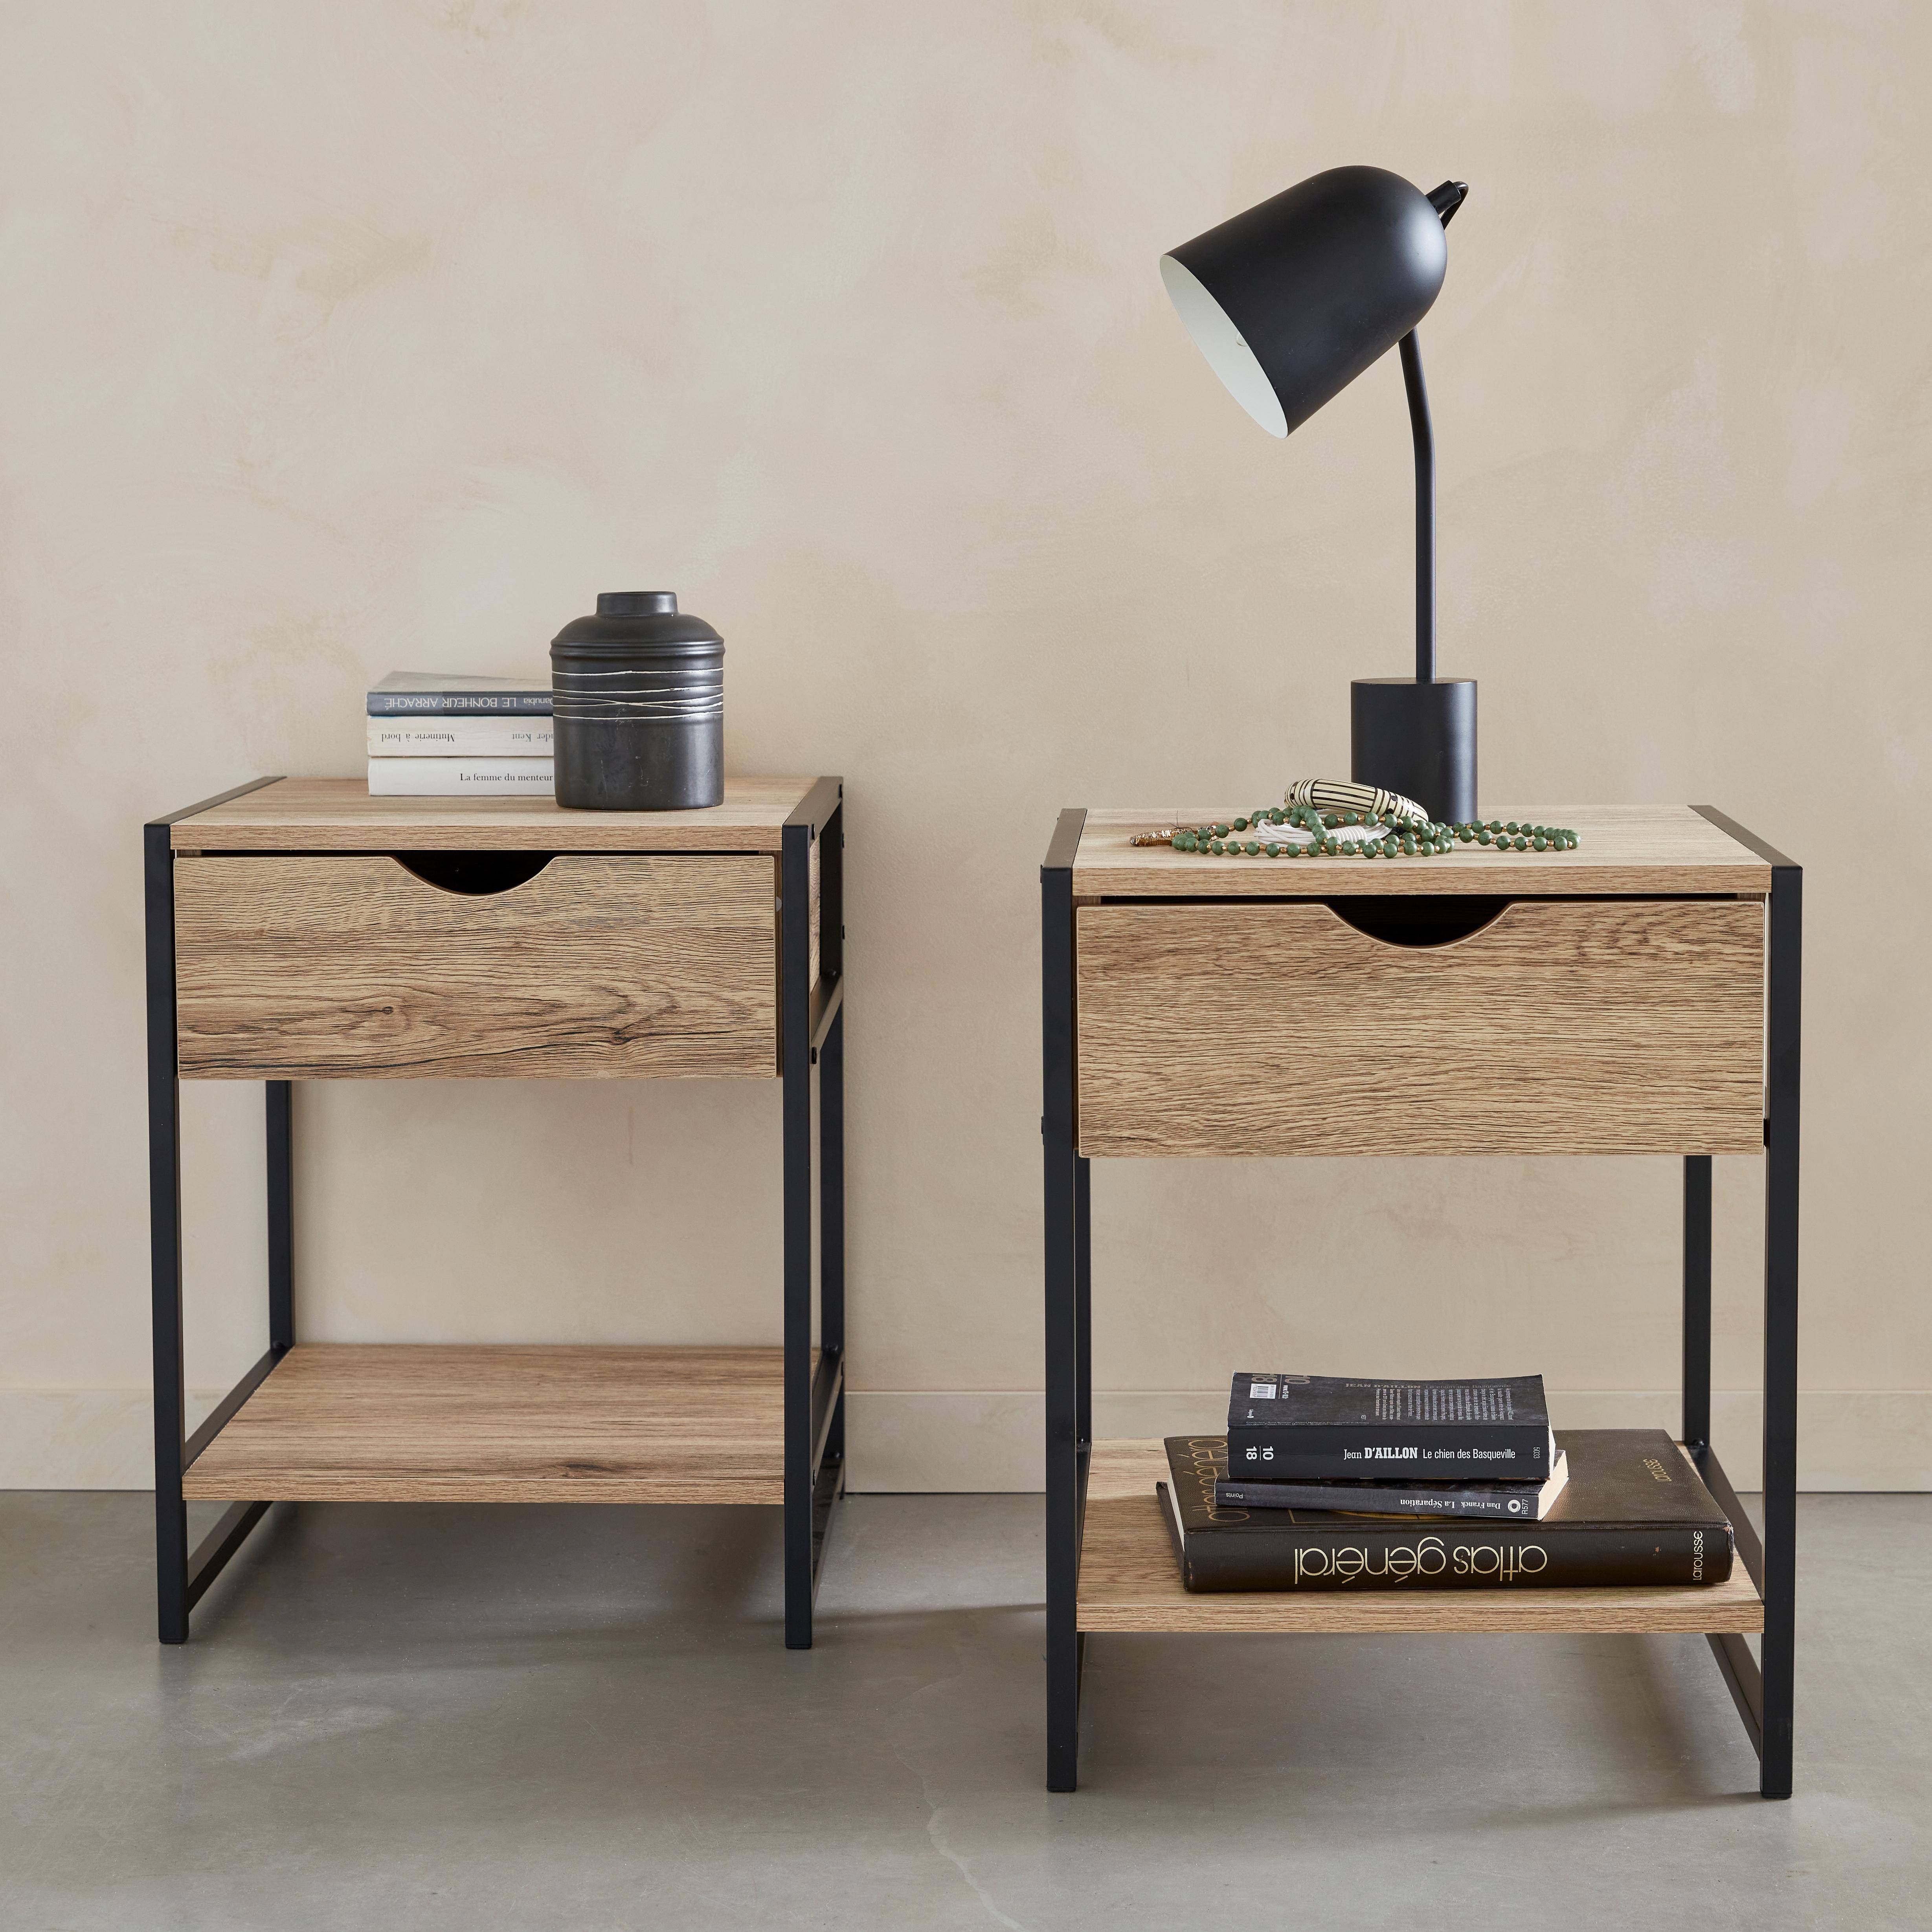 Pair of metal and wood-effect bedside tables with drawer and shelf, 40x40x50cm - Loft Photo1